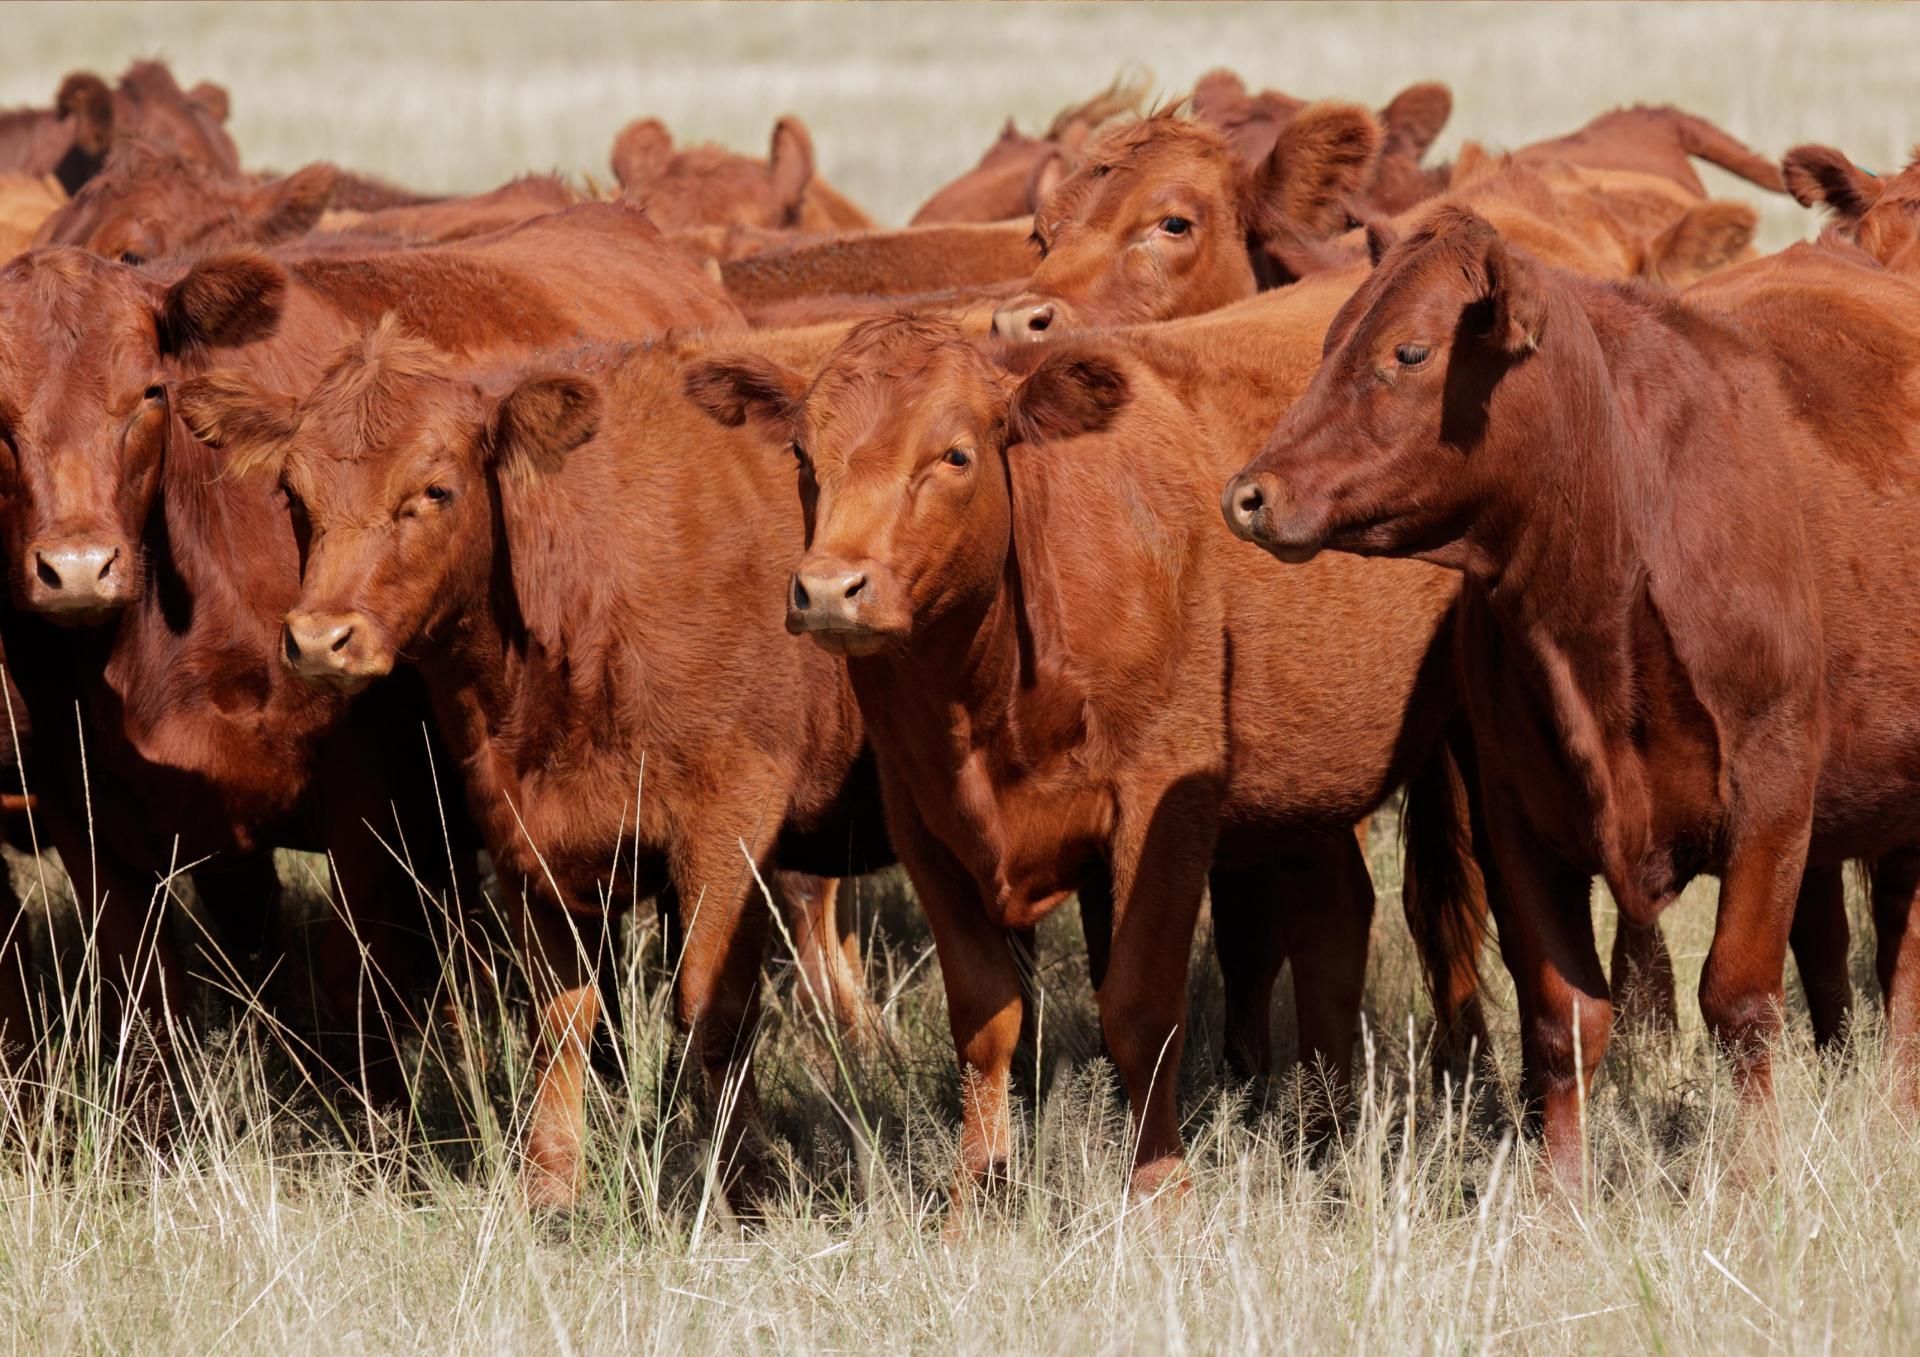 A herd of brown cows standing in a field looking at the camera